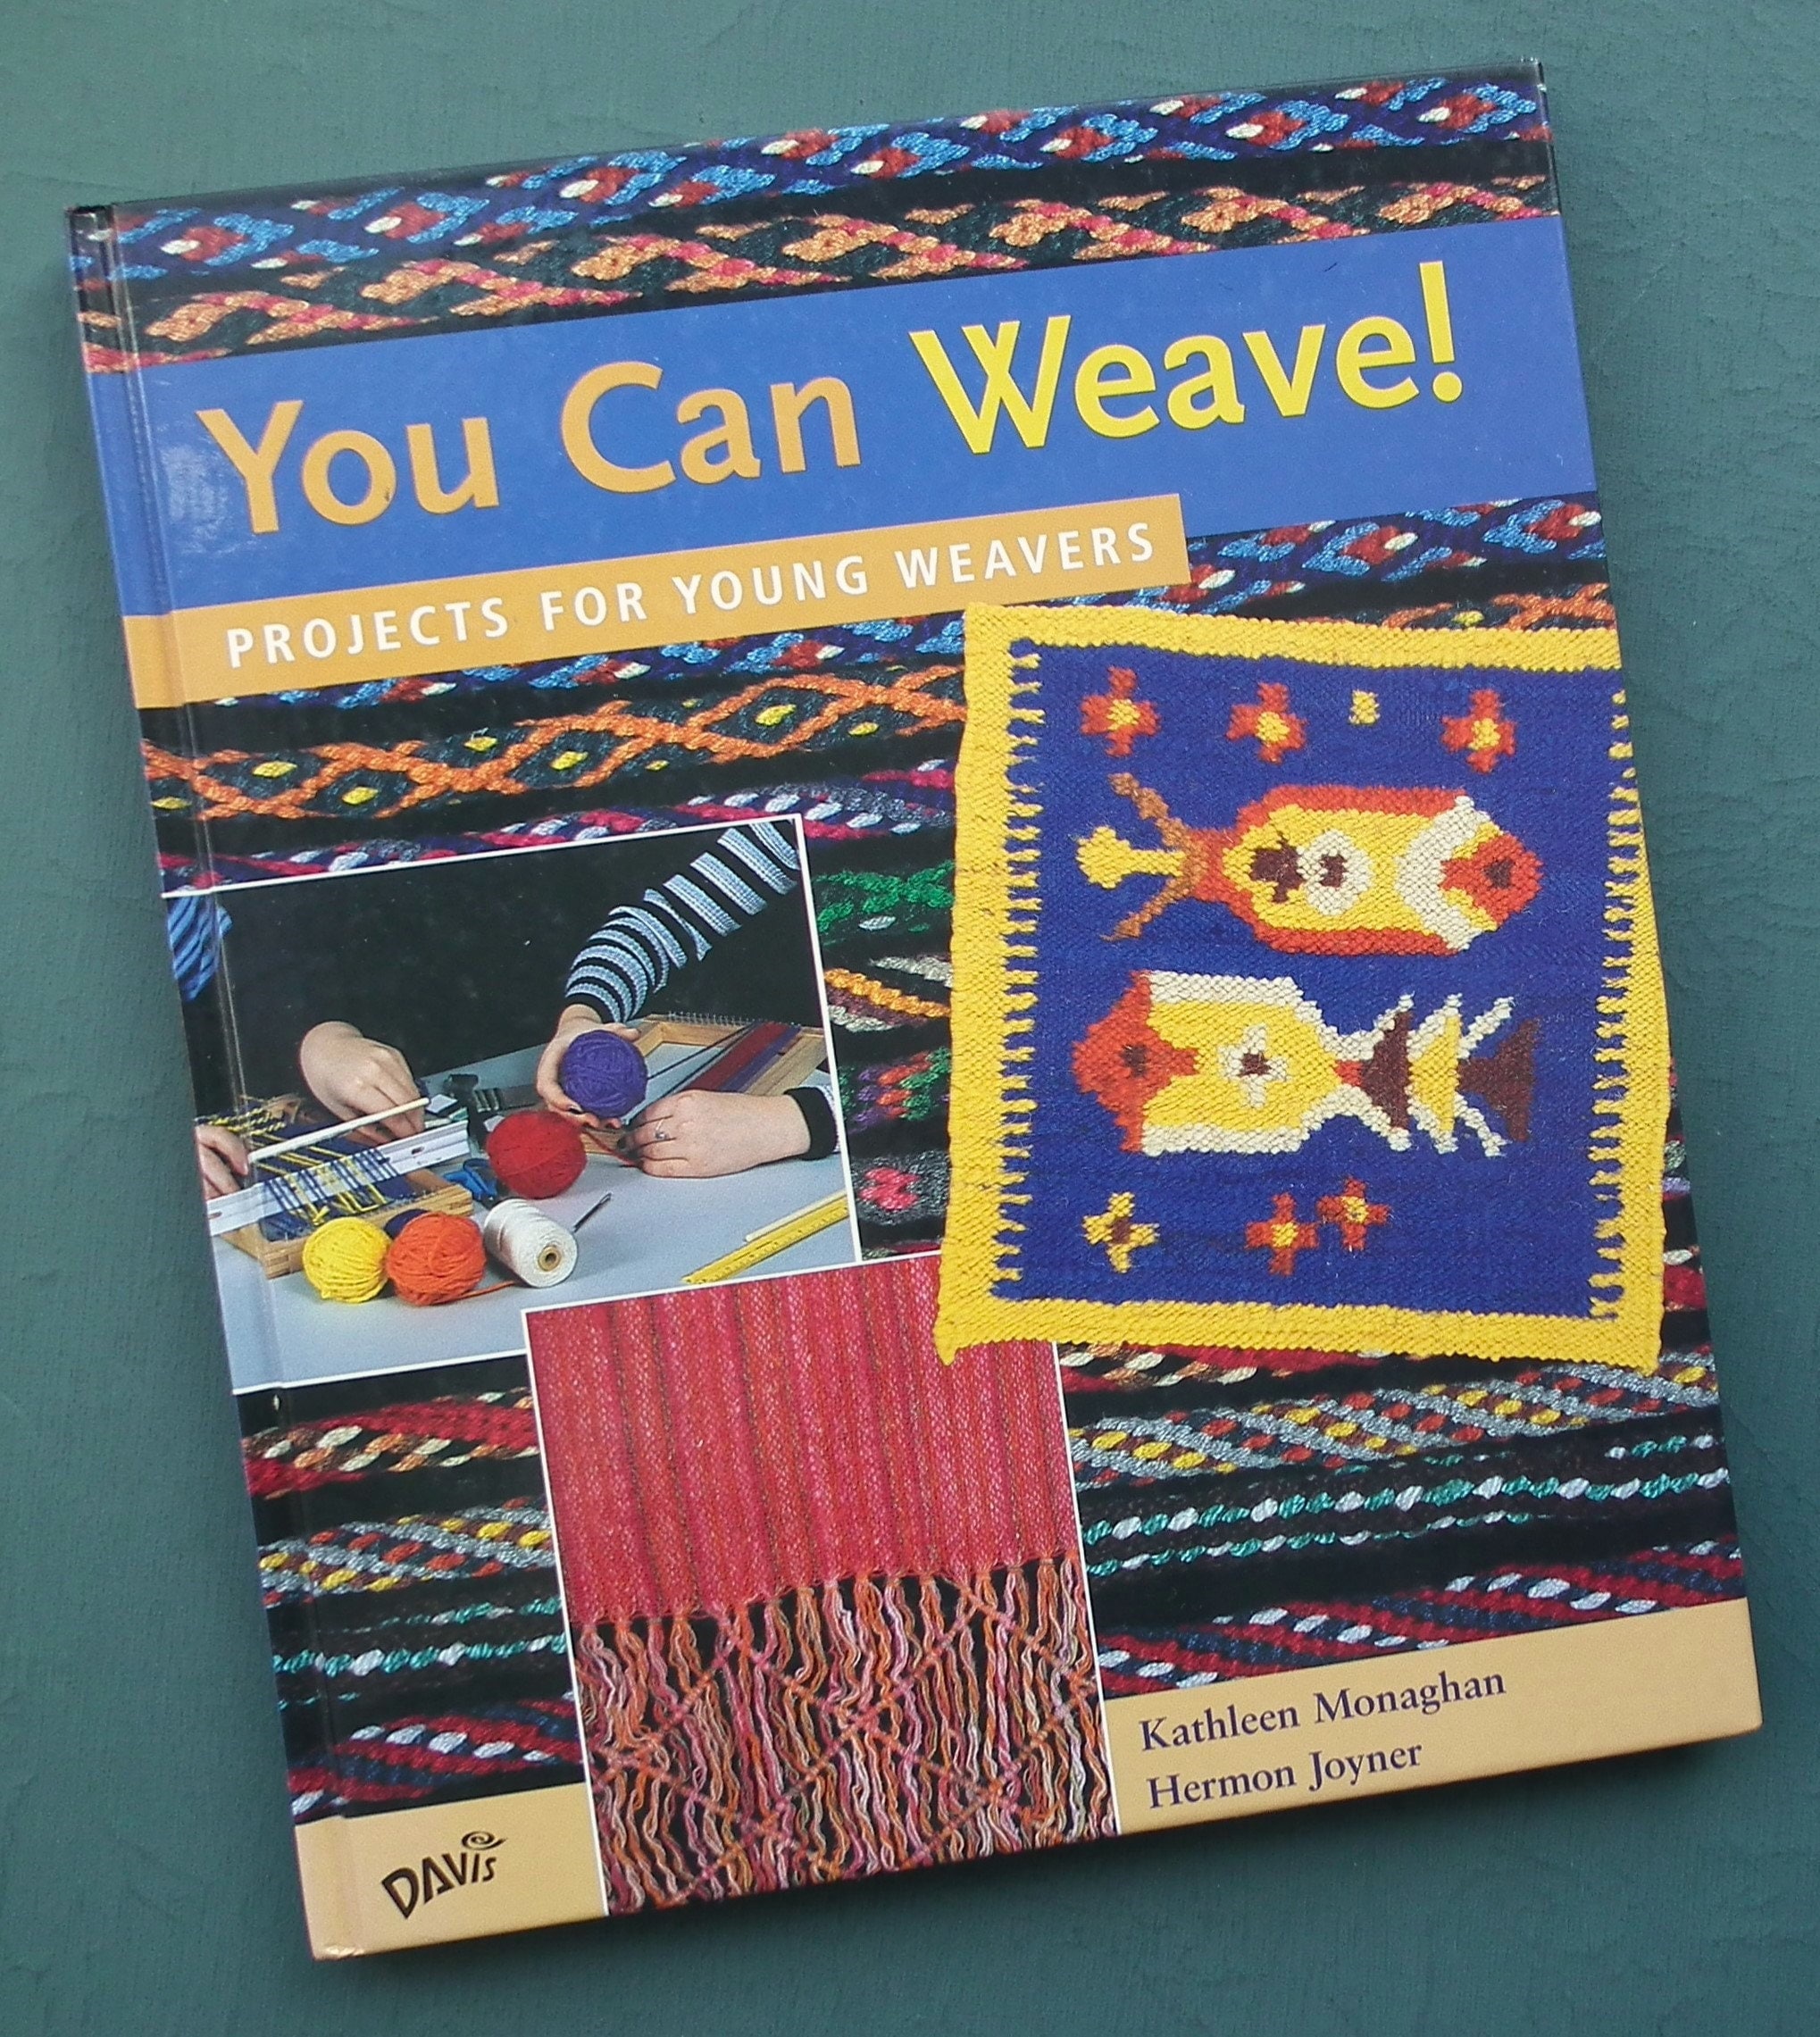 Loom Beading by Ann Benson Digital PDF Download Edition Book, 193 Pages 